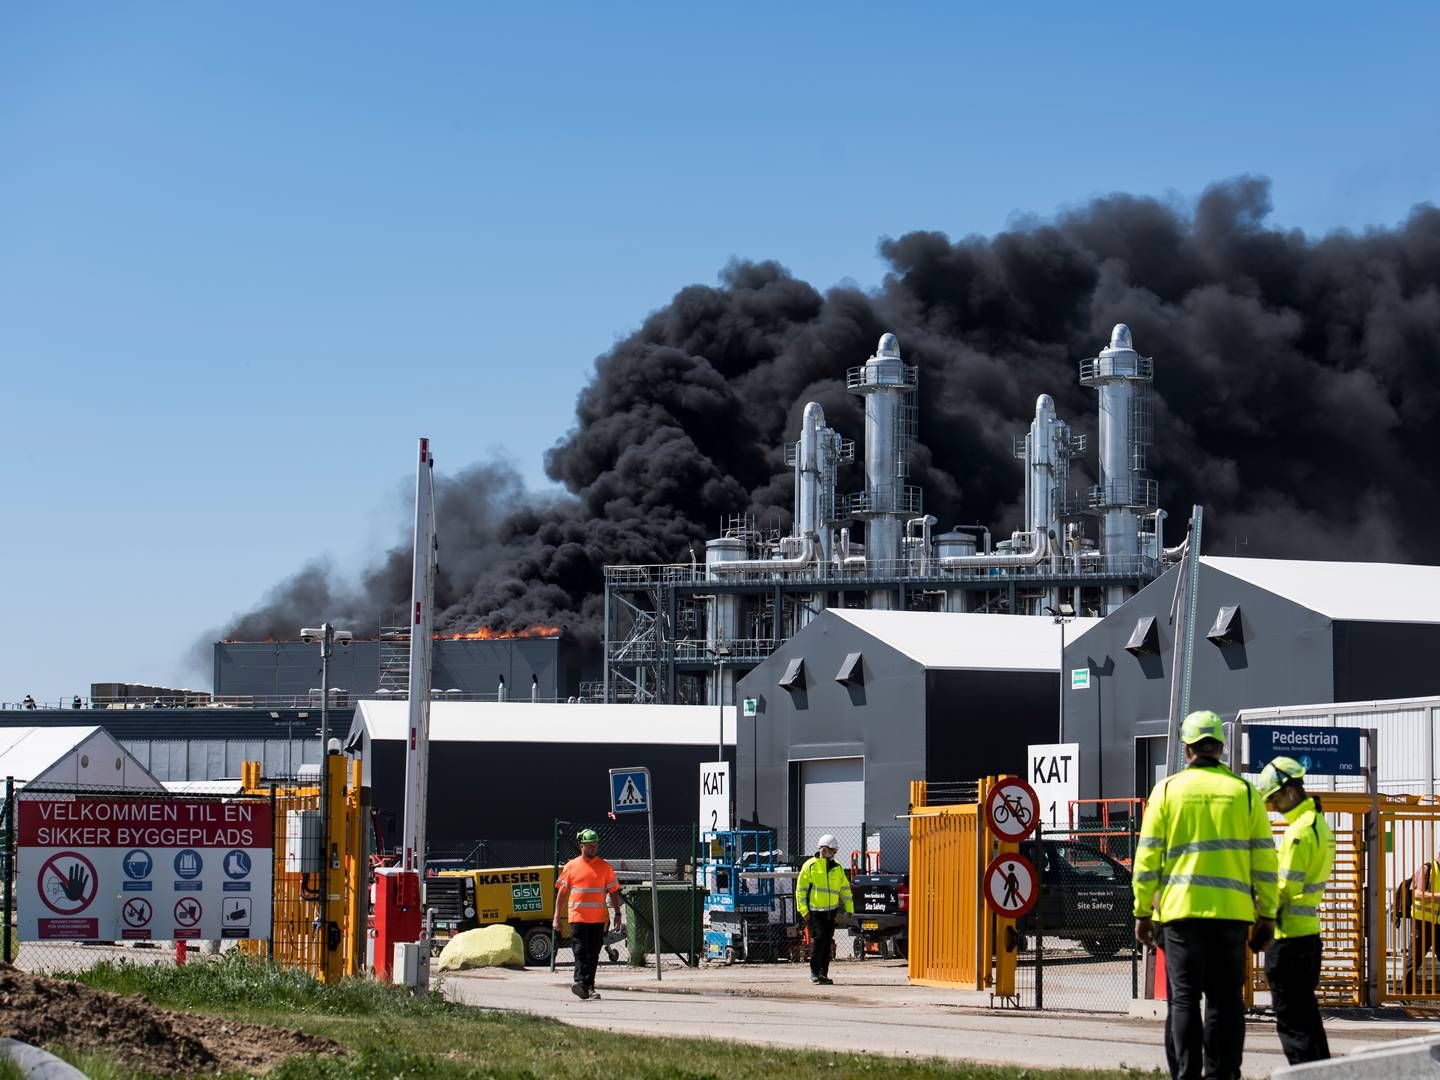 On May 16, a major fire broke out at Novo Nordisk's construction site in Kalundborg. Internal minutes from a safety meeting link the cause of the fire to people working illegally. | Foto: Jokum Tord Larsen/Ritzau Scanpix